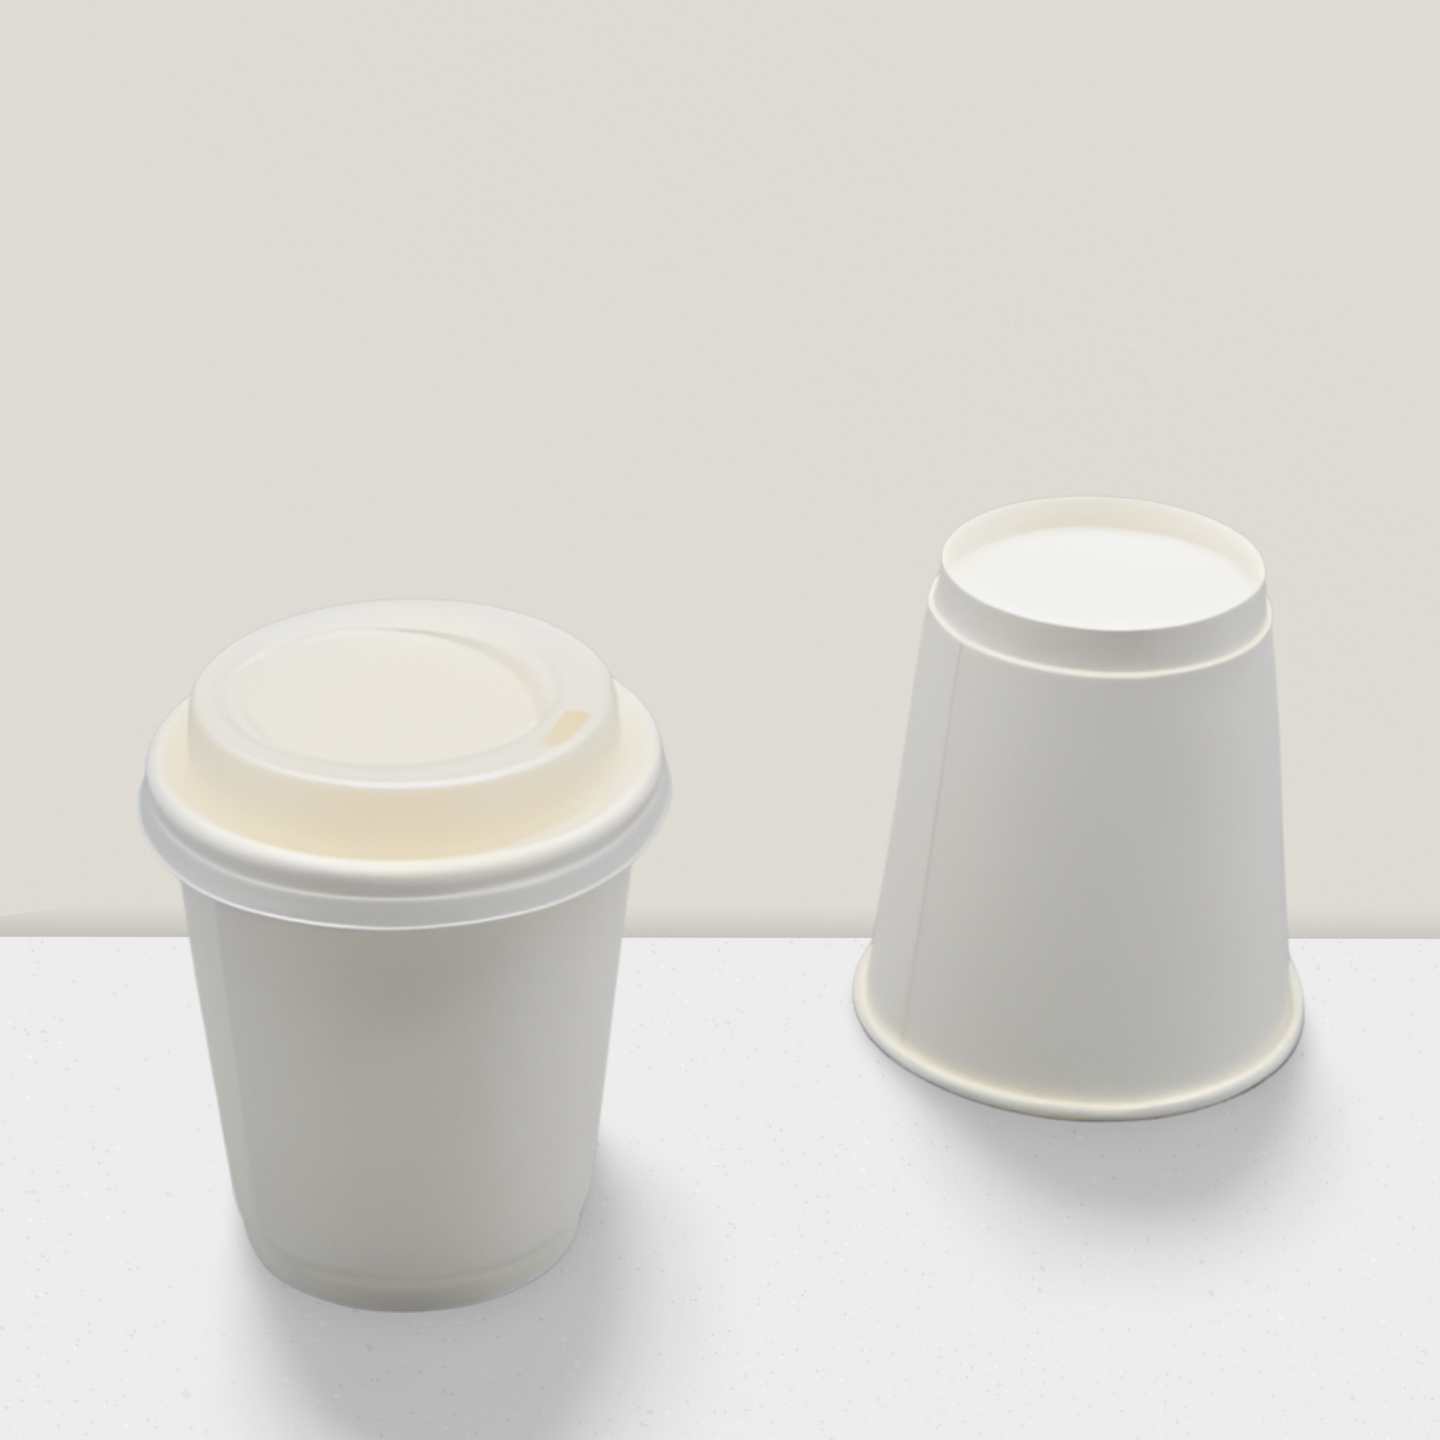 Recyclable 7oz Paper Cup (4)